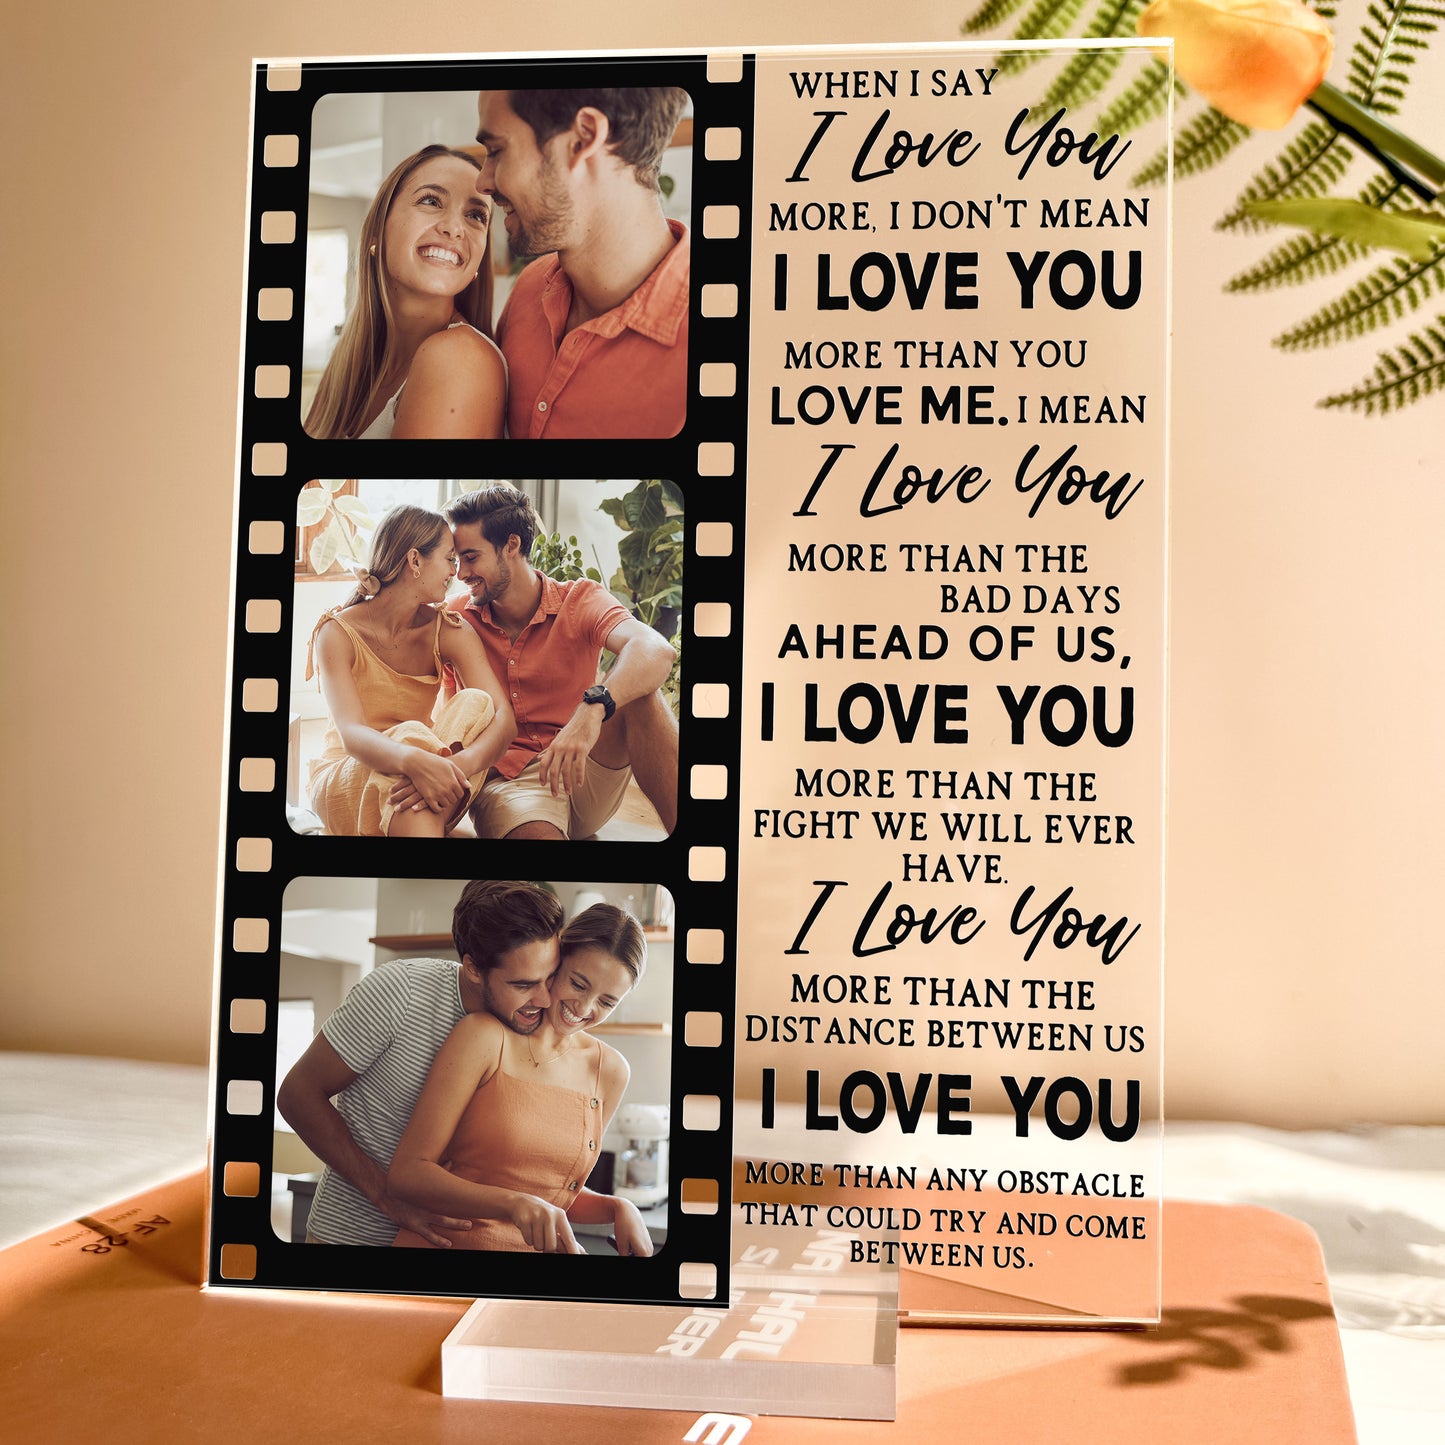 When I Say I Love You More - Personalized Acrylic Photo Plaque - Anniversary Gifts For Her, Him